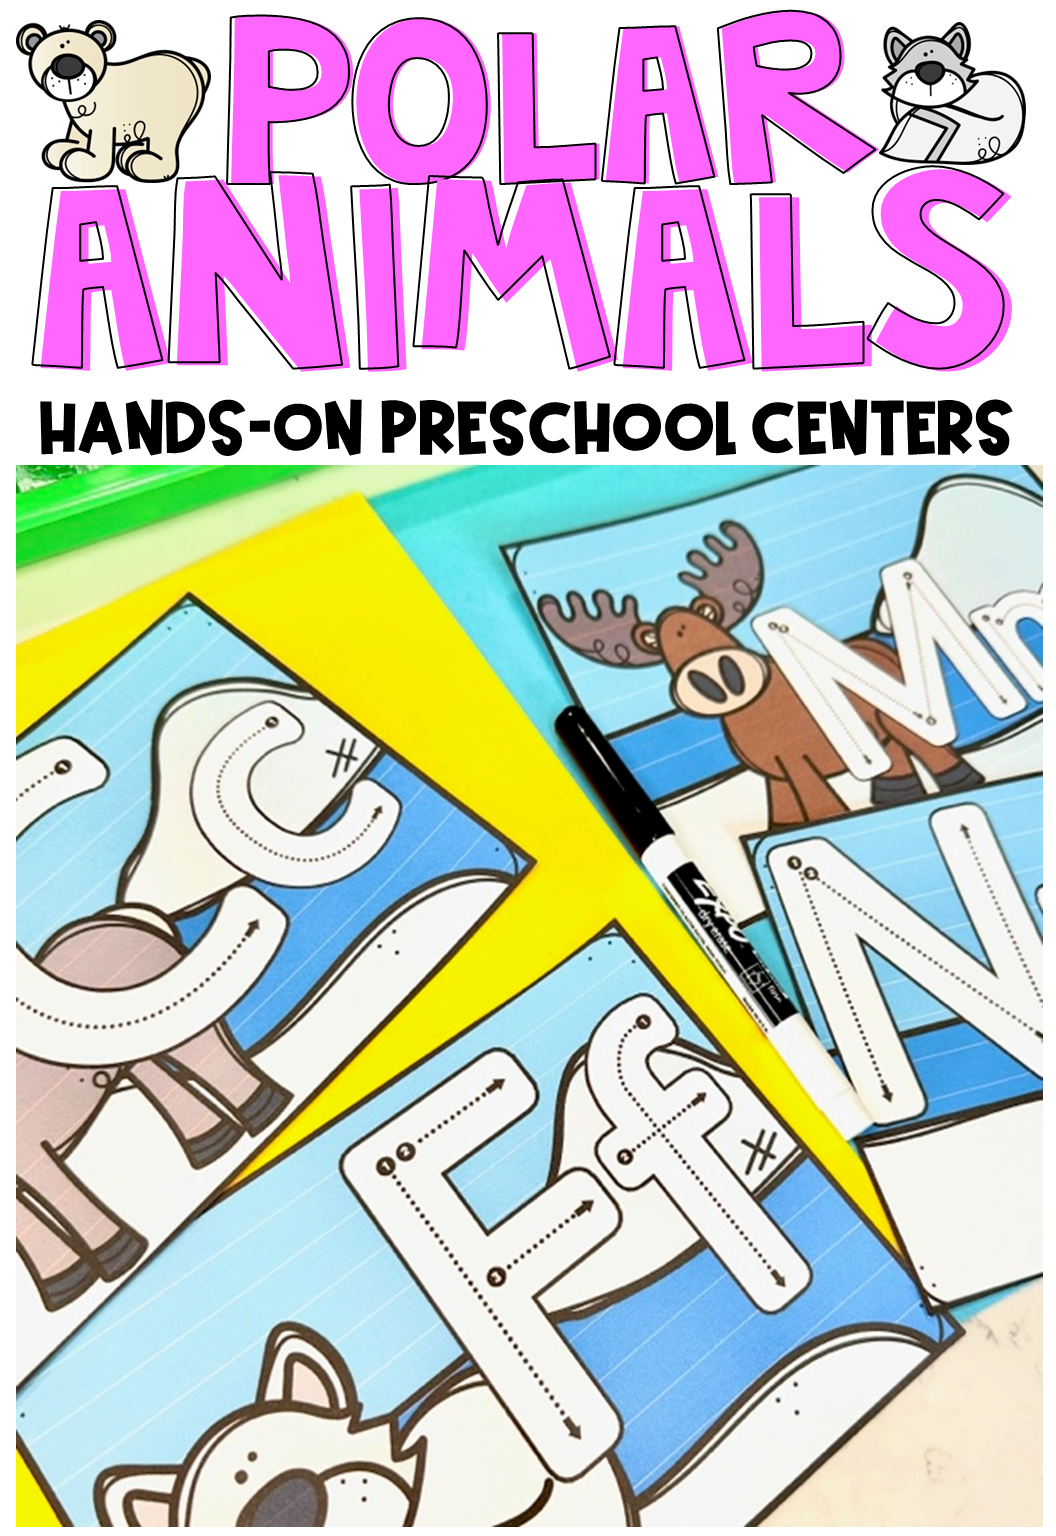 Are you looking for polar animal math and literacy centers for your preschool classroom for the month of January? Then you will love our Polar Animals Centers and Morning Bins for the winter months of preschool.